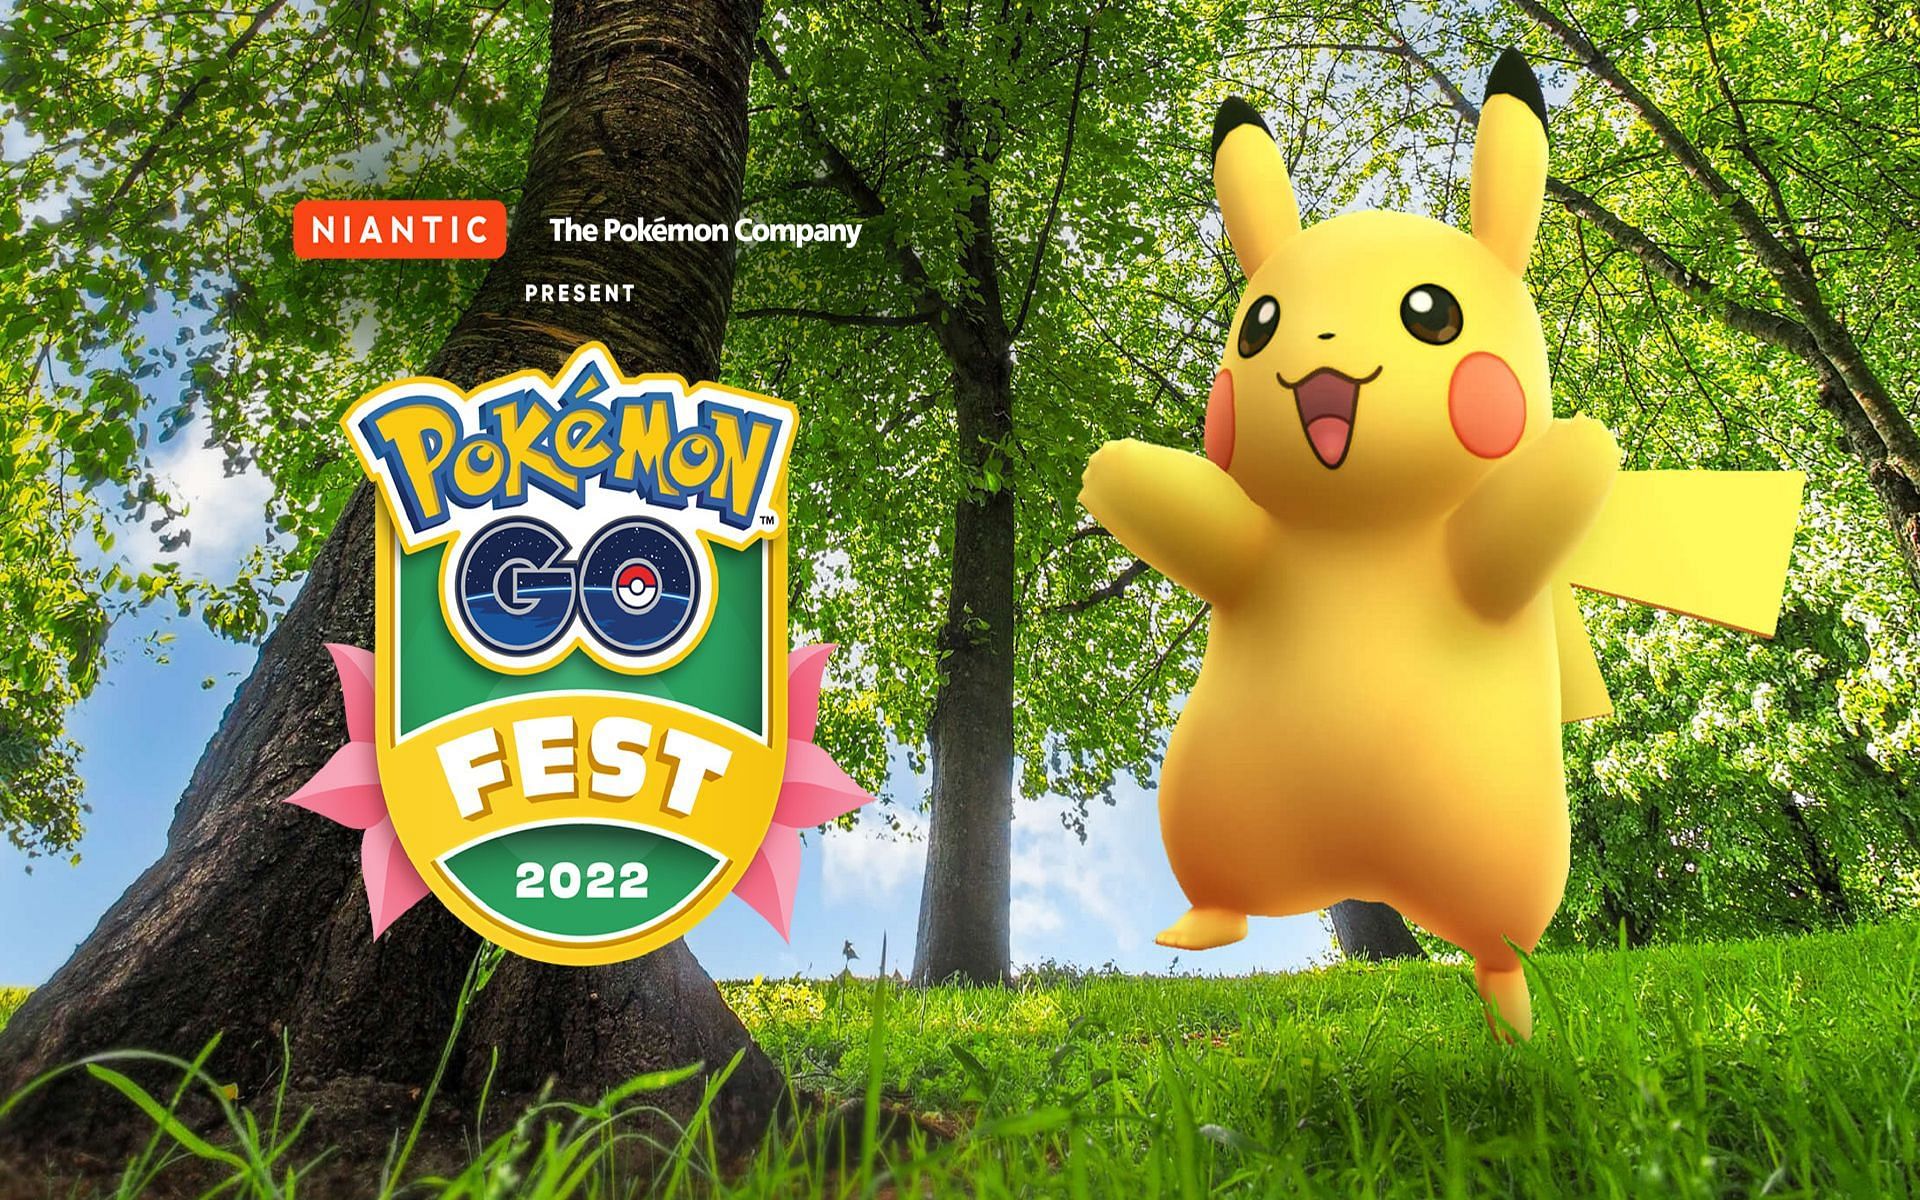 What are the dates for Pokemon GO Fest 2022?